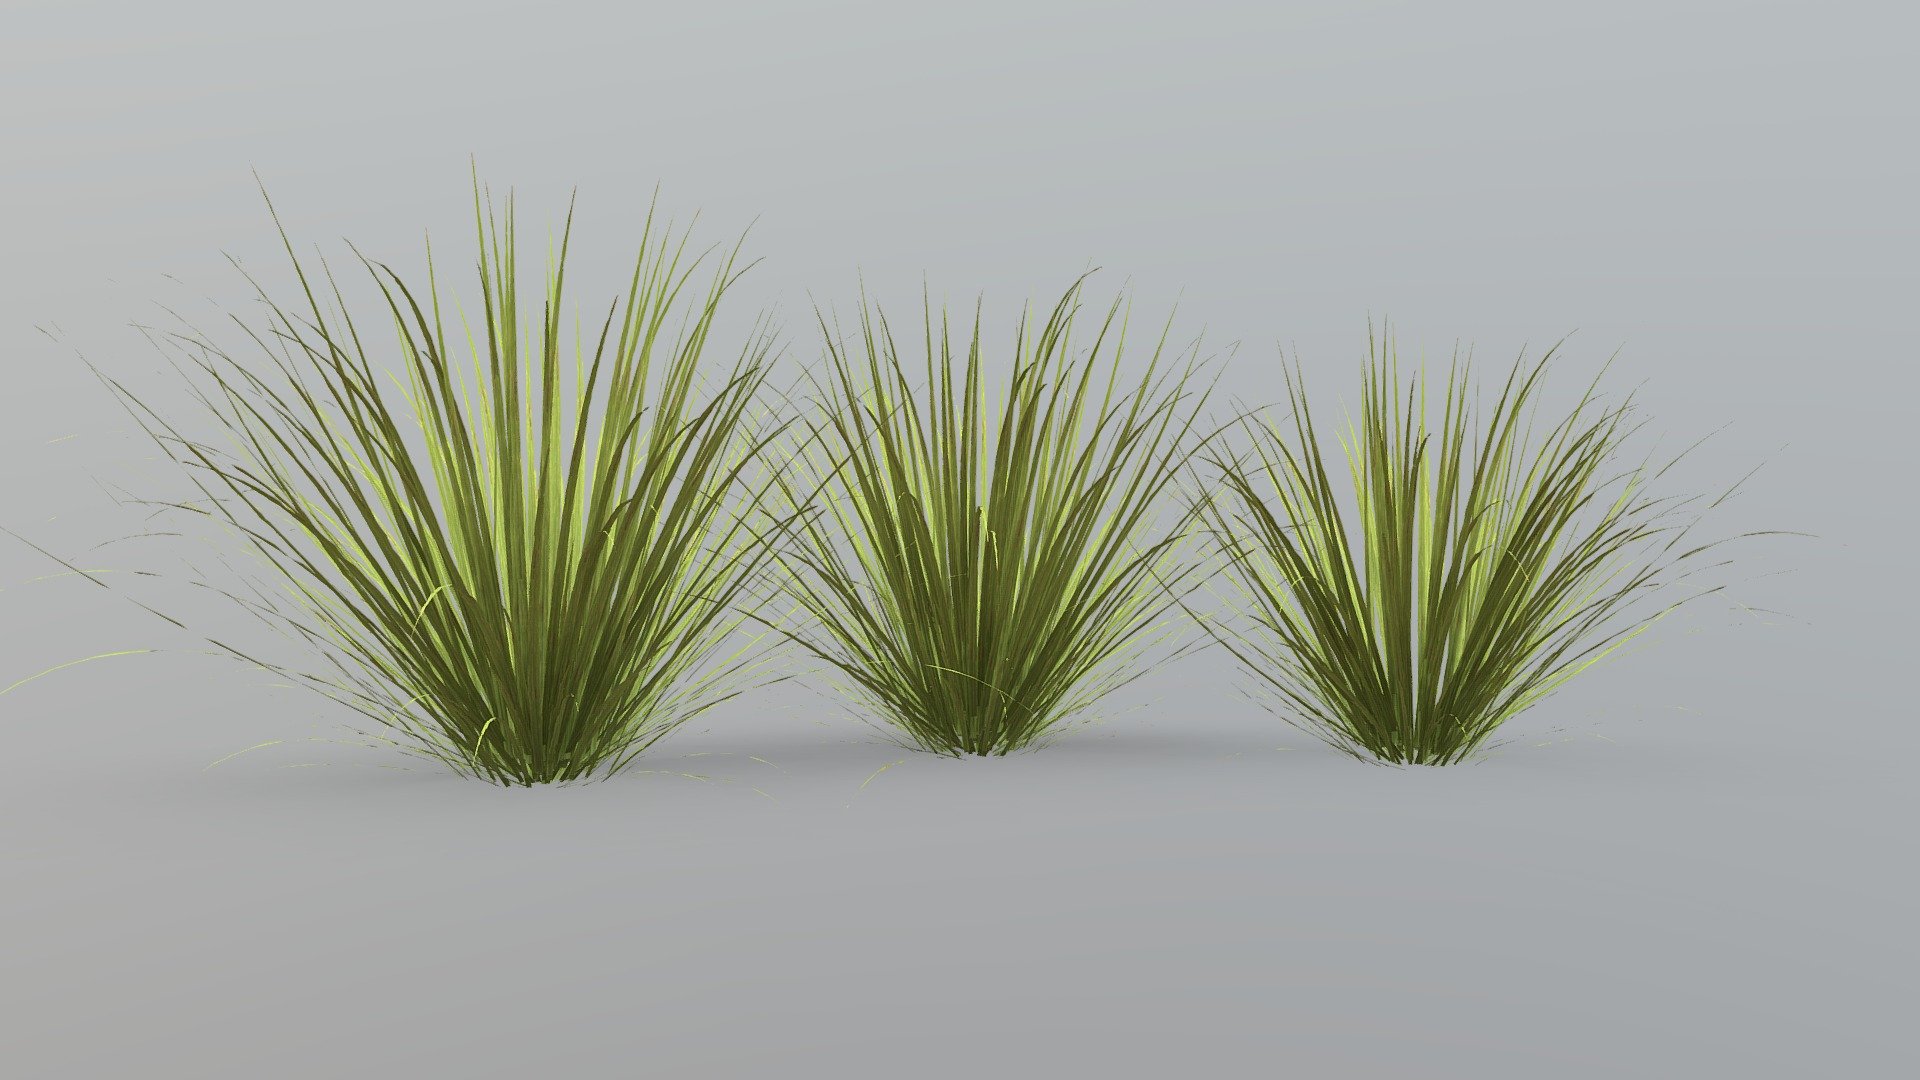 Included files: fbx, Textures are  included

Item description: Long Grass x3

commonly used for exterior planting

This Long Grass model was created using Speedtree 9 - Long Grass - Buy Royalty Free 3D model by zlevi 3d model